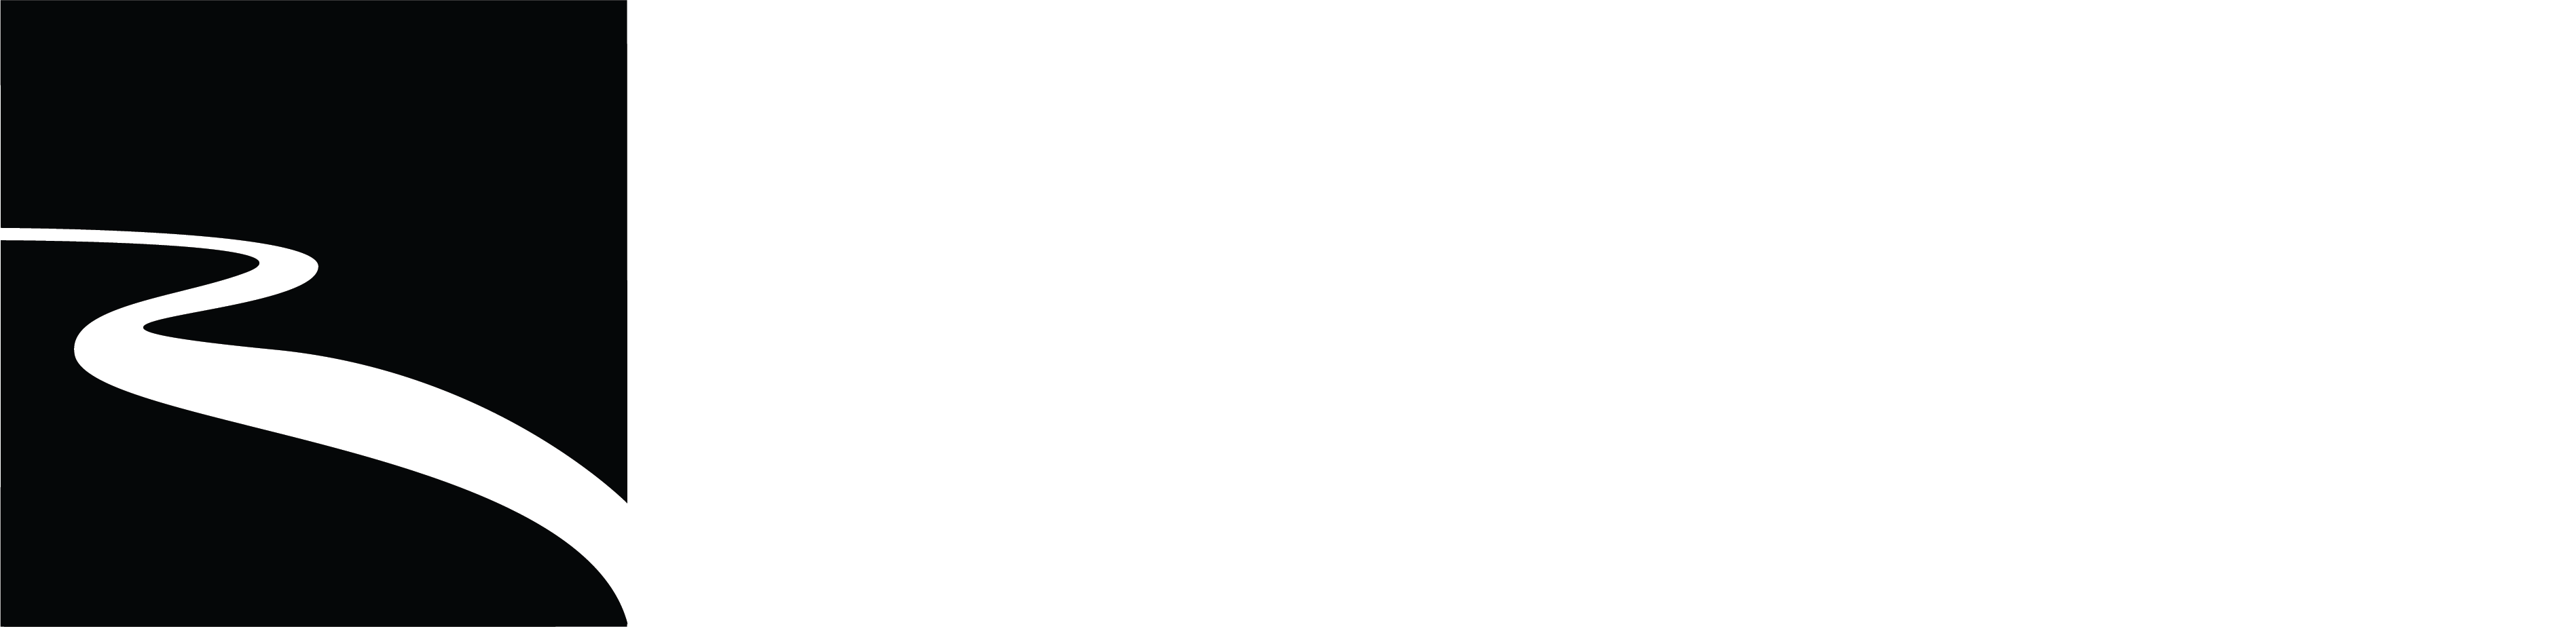 West River Homes